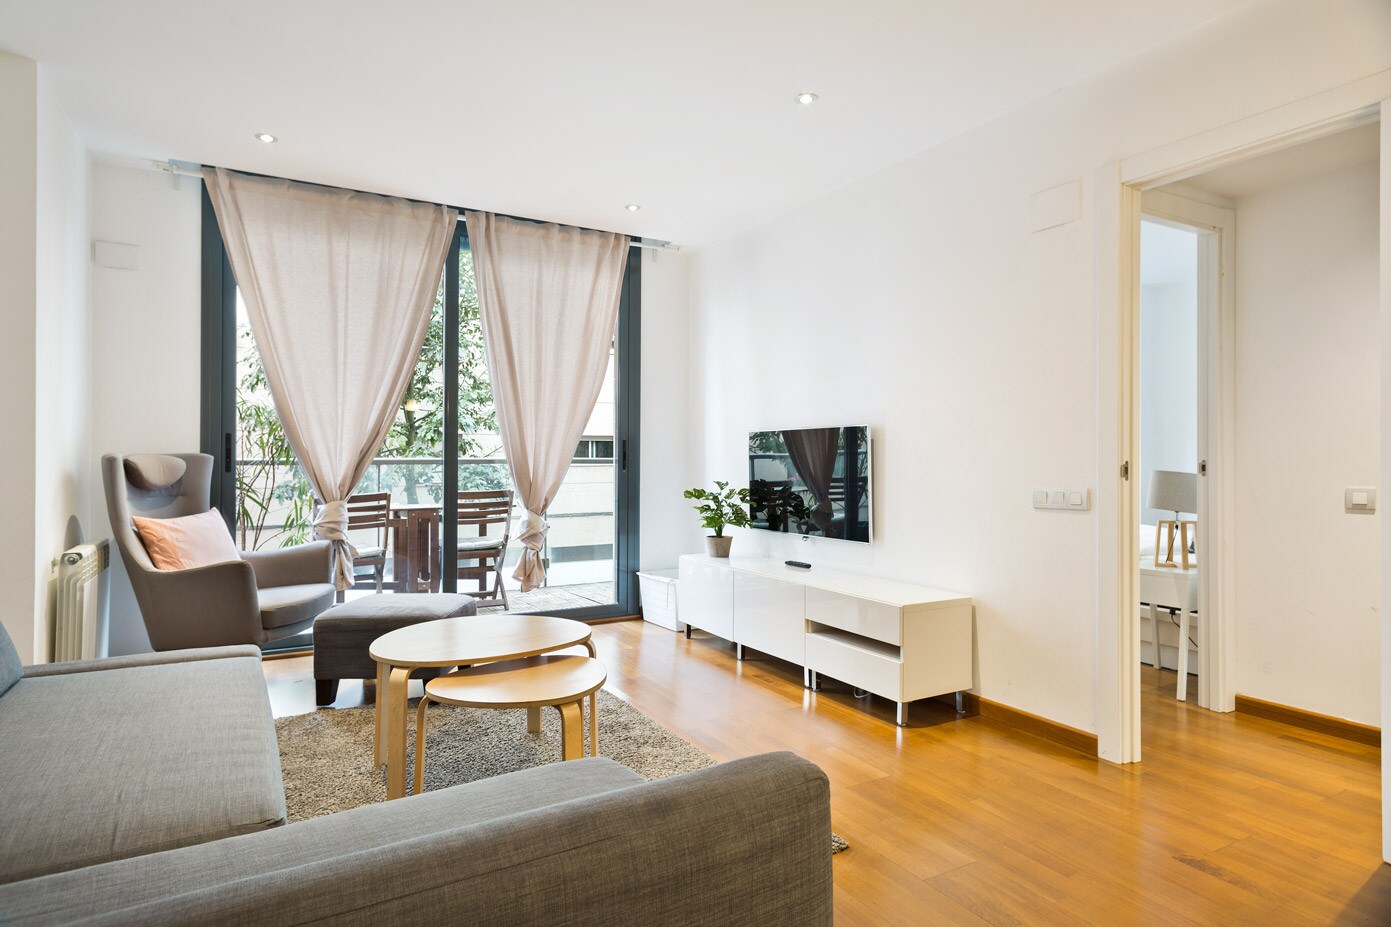 Property Image 1 - Affluent Plush Apartment with City Views from Balcony